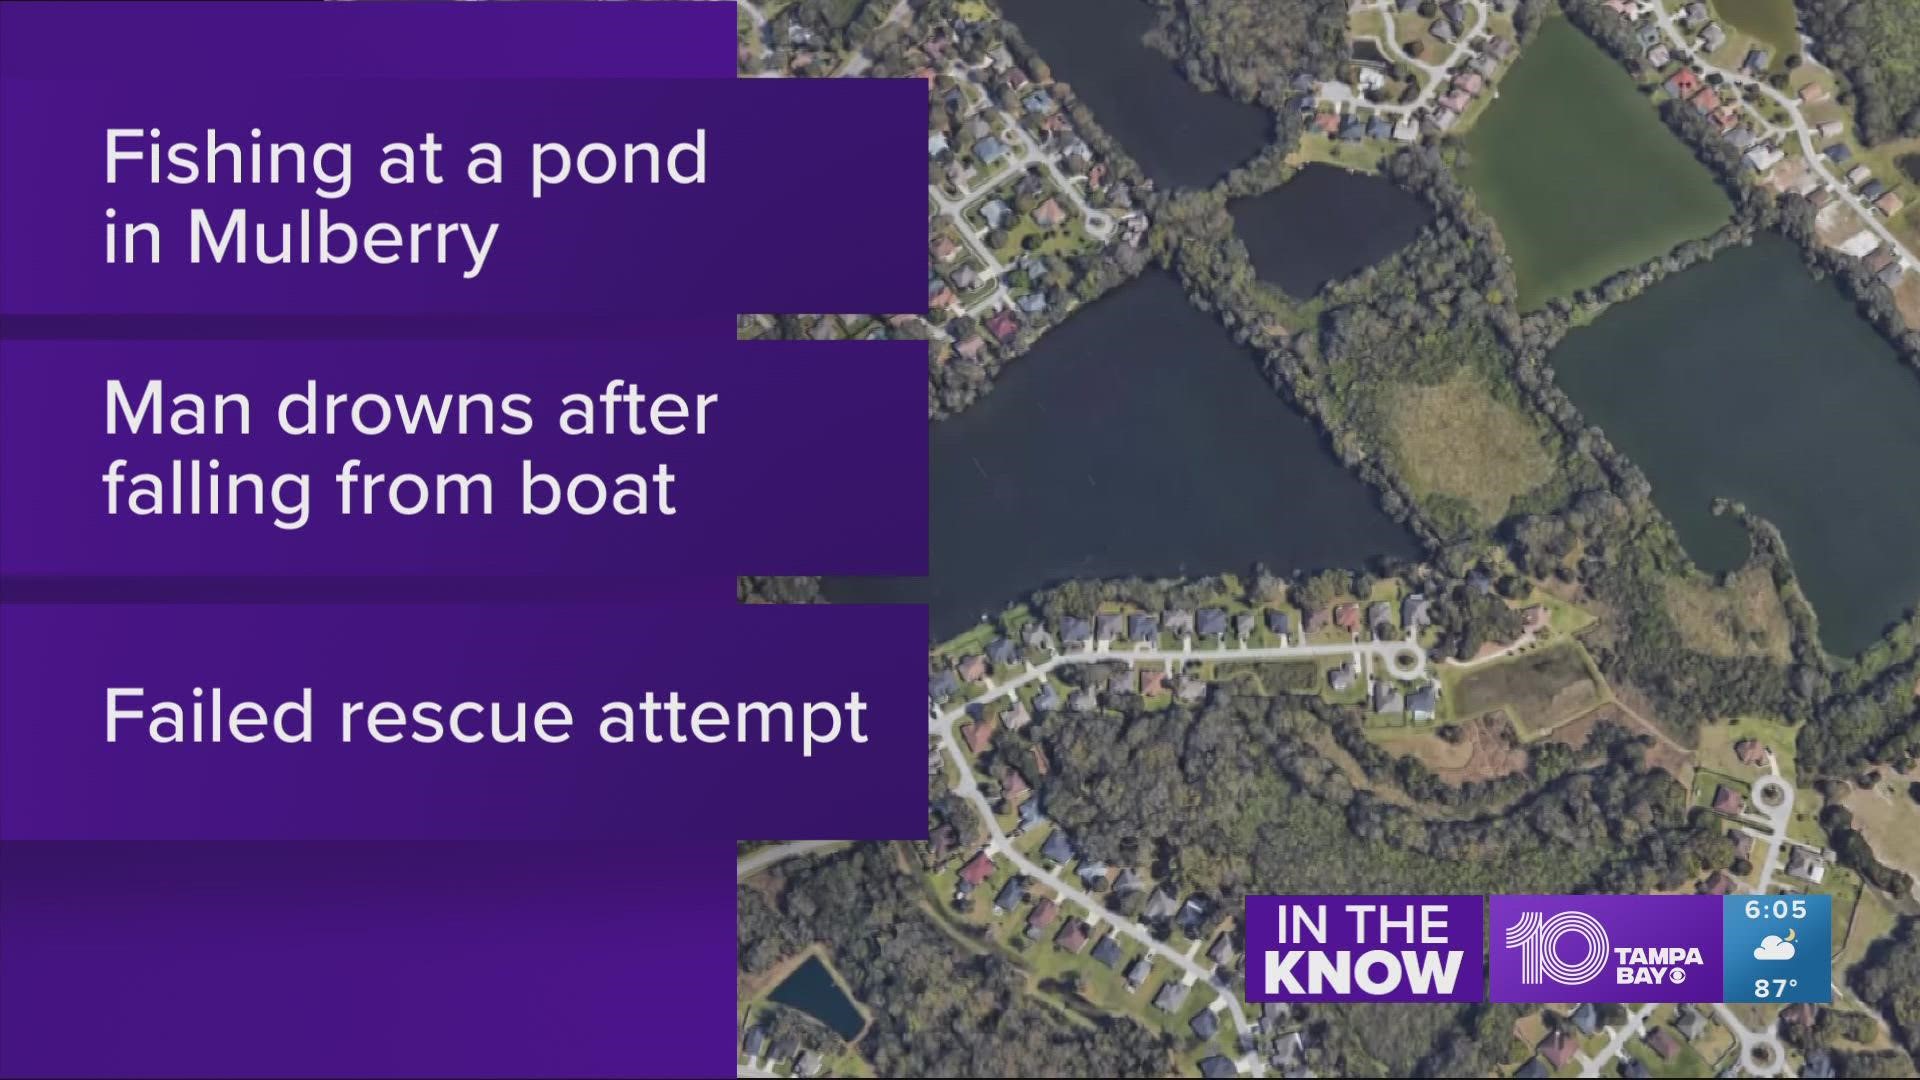 Bruce Morgan was found in about 9 feet of water, the sheriff's office said.